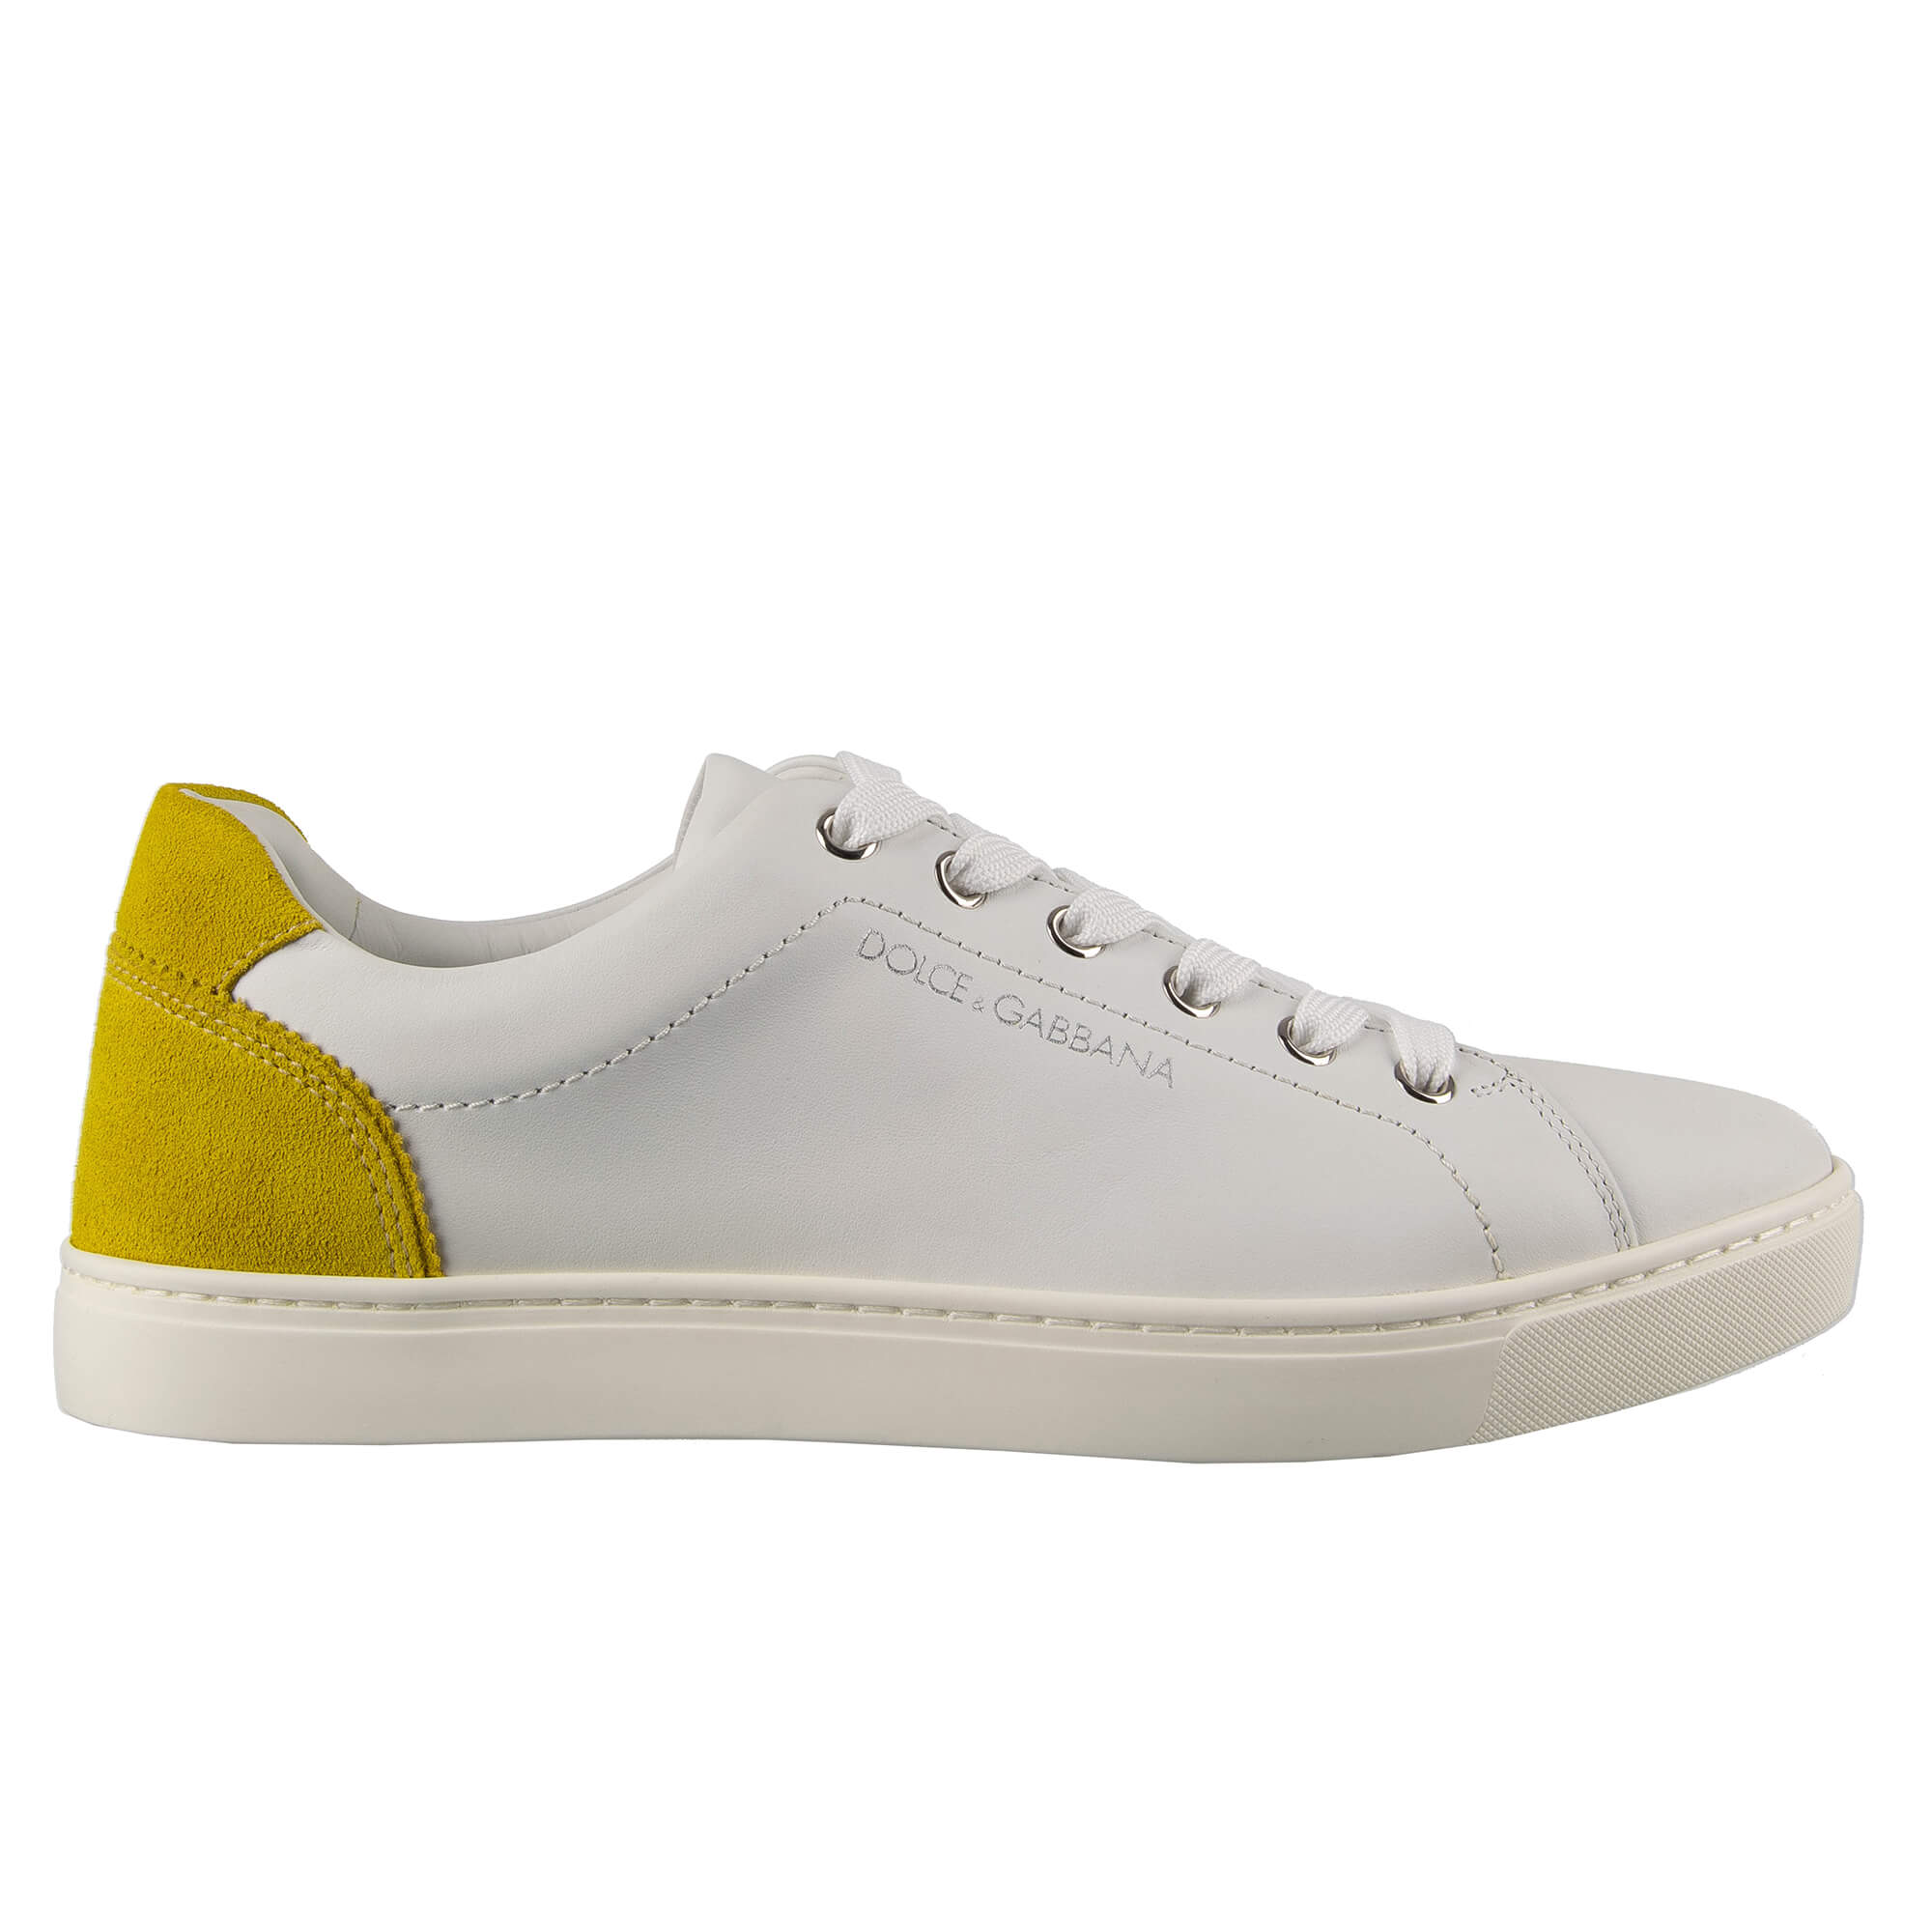 Dolce & Gabbana Leather Sneakers LONDON White Yellow | FASHION ROOMS